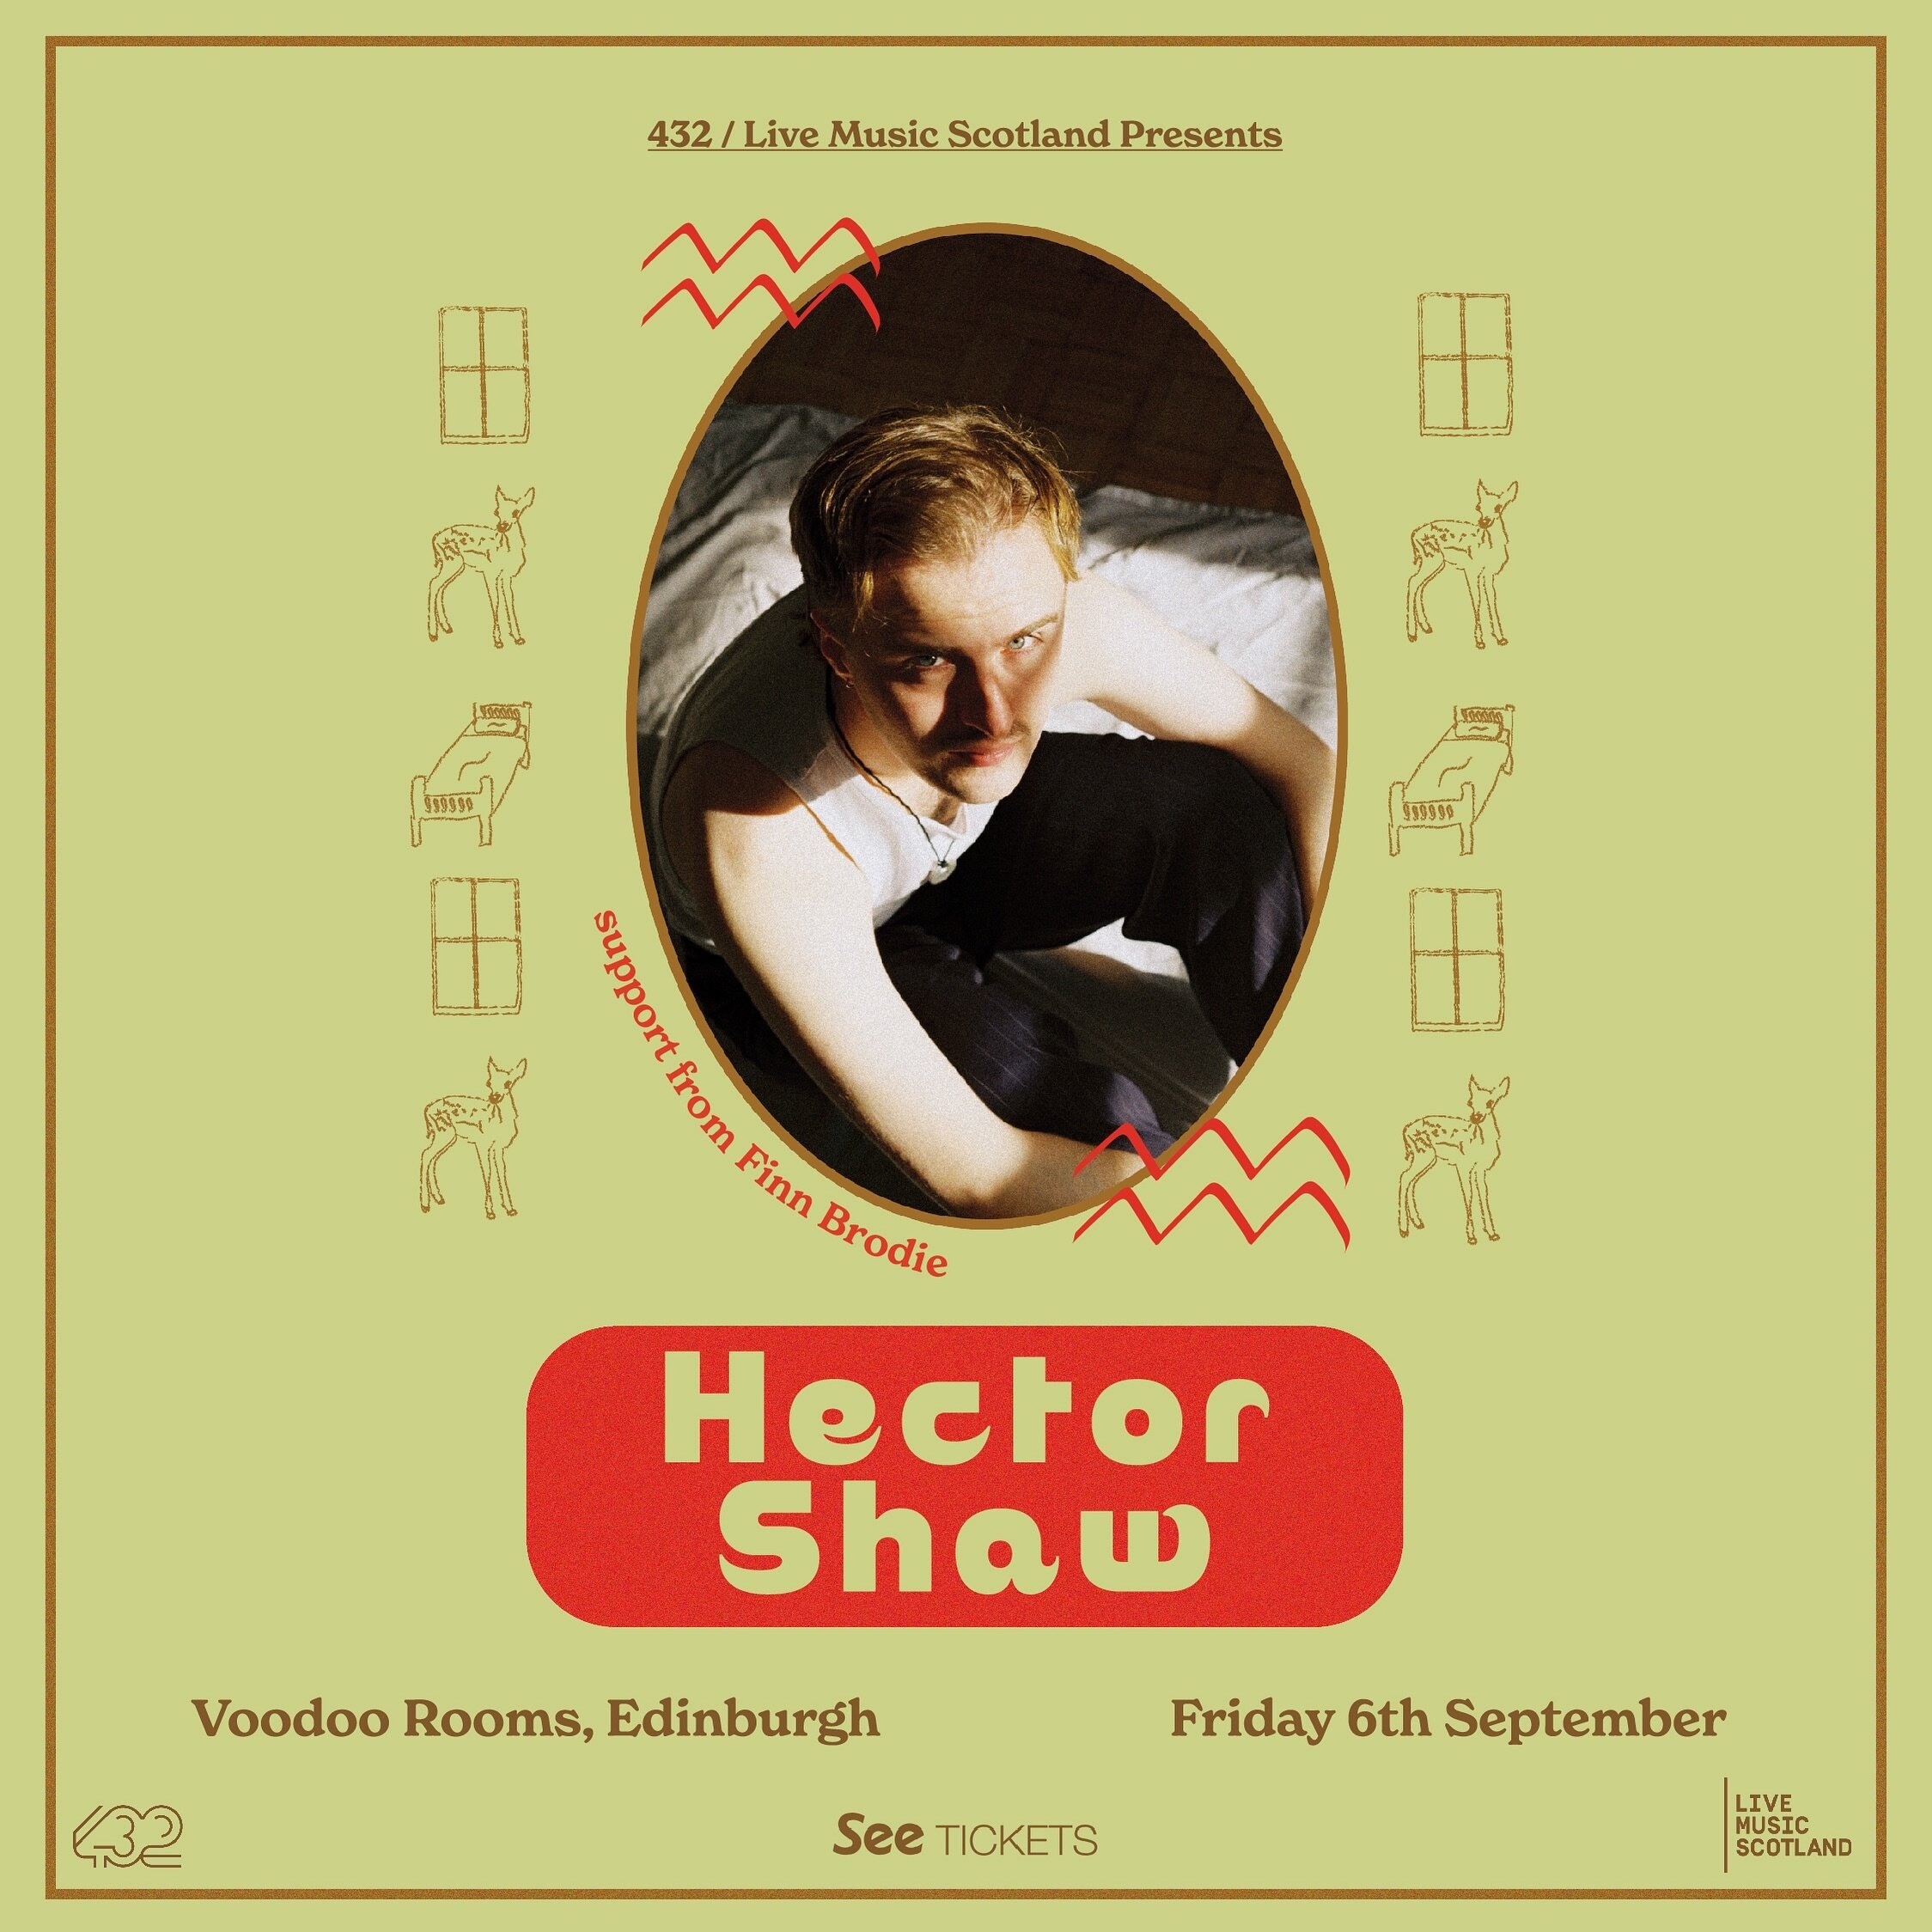 Just announced @hectorshaw_ headline show 🔥 6th Sept @thevoodoorooms @432presents @livemusicsco tickets on sale now